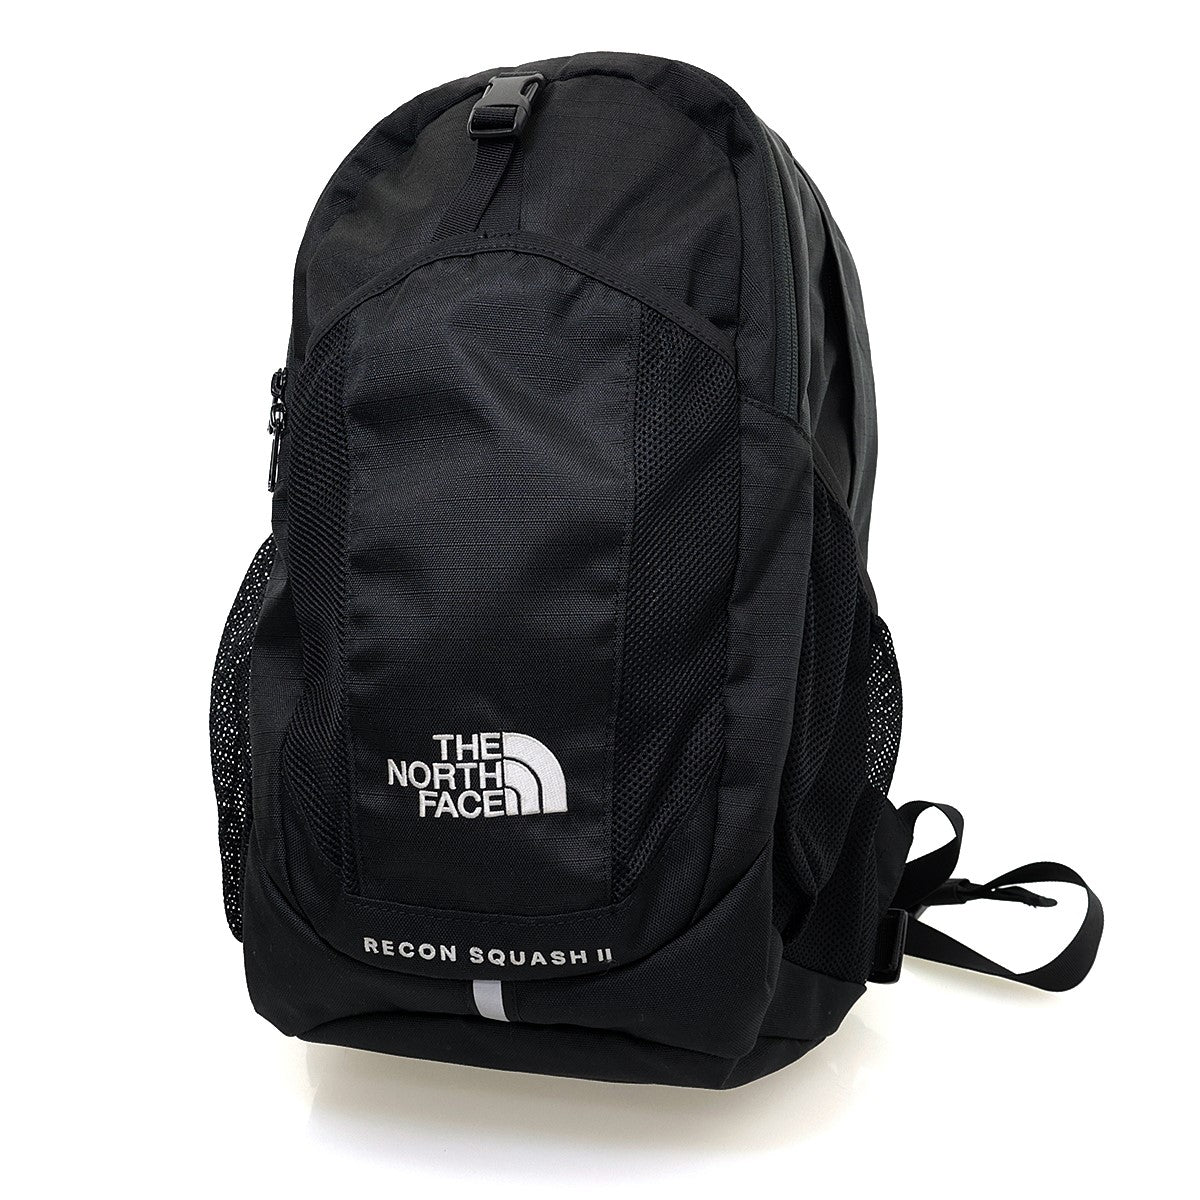 THE NORTH FACE(ザノースフェイス) RECON SQUASH 2 リーコンスカッシュ2　バックパック　NM82183A